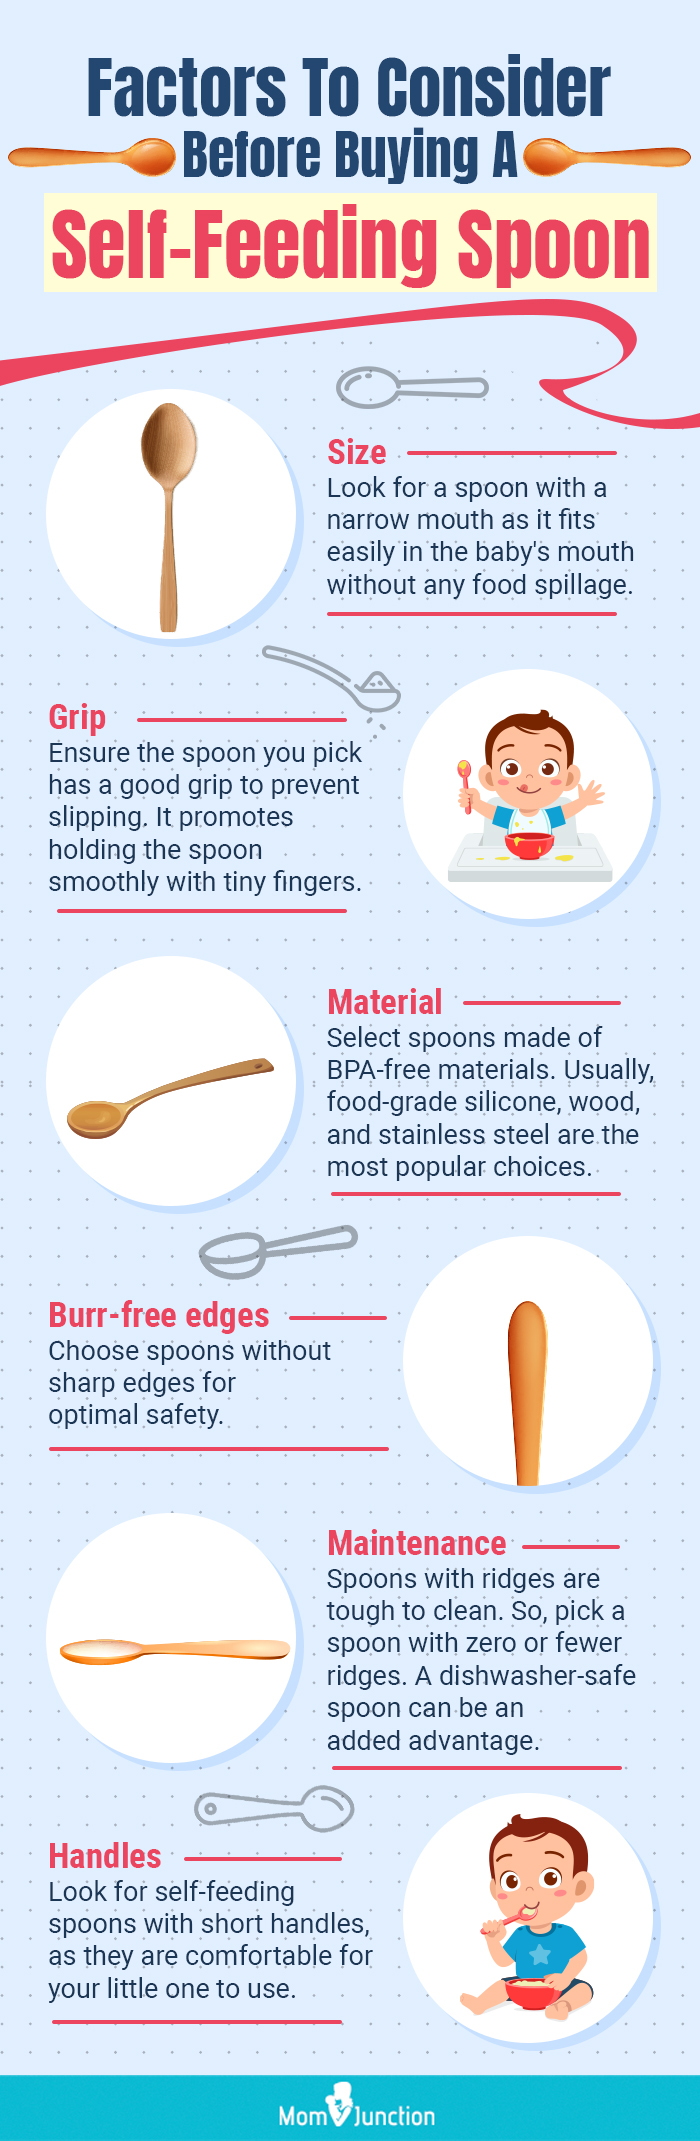 6 Spoon-Feeding Techniques to Create Lifelong Healthy Eating Habits, by My  Baba